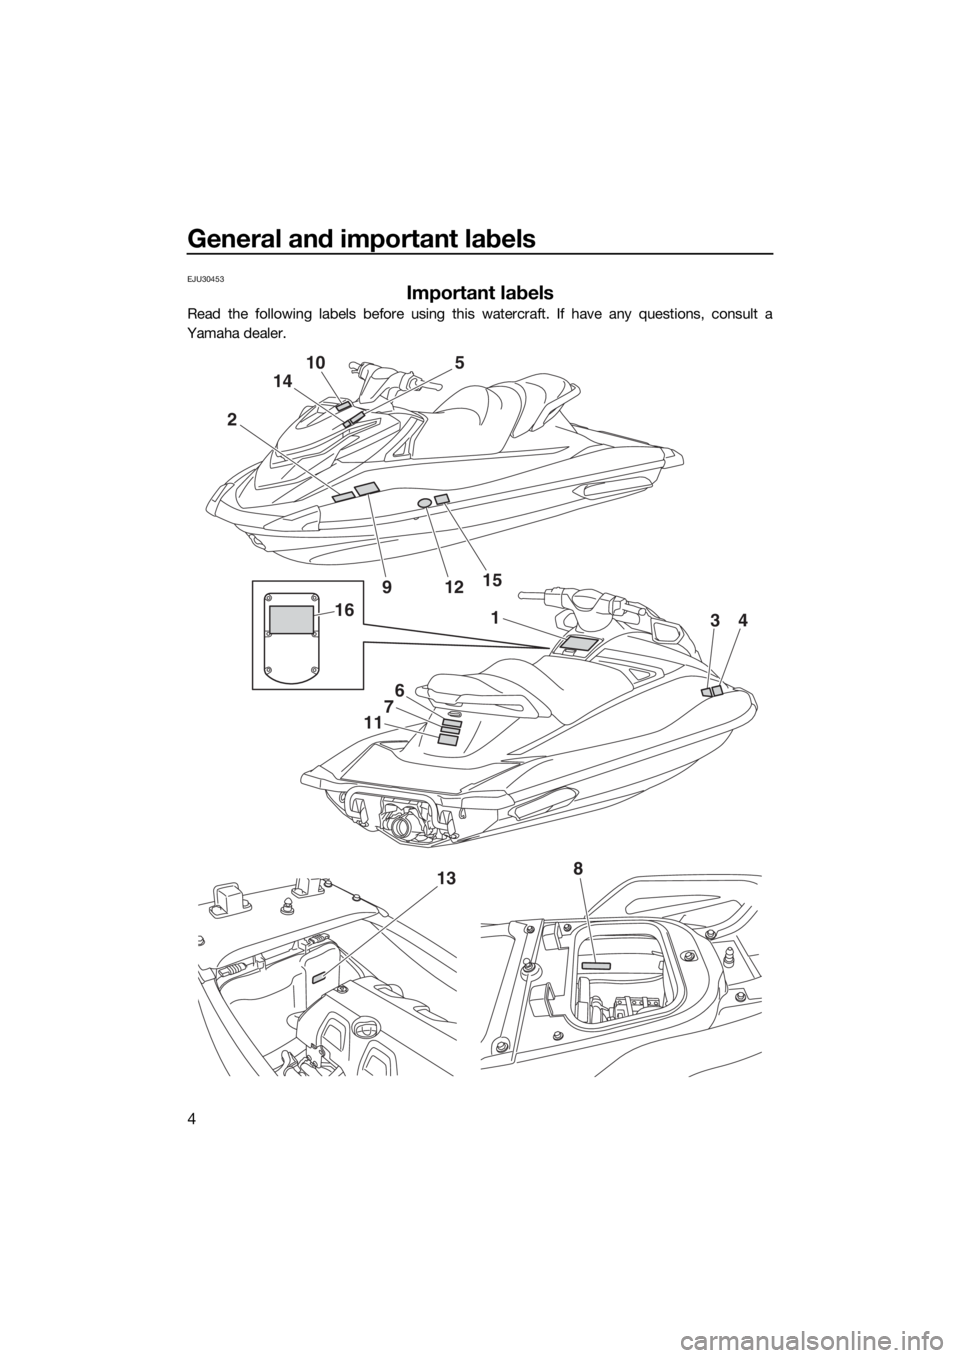 YAMAHA VXR 2018  Owners Manual General and important labels
4
EJU30453
Important labels
Read the following labels before using this watercraft. If have any questions, consult a
Yamaha dealer.
2
10
14
1
6
7
11
34
5
91512
16
813
UF2W